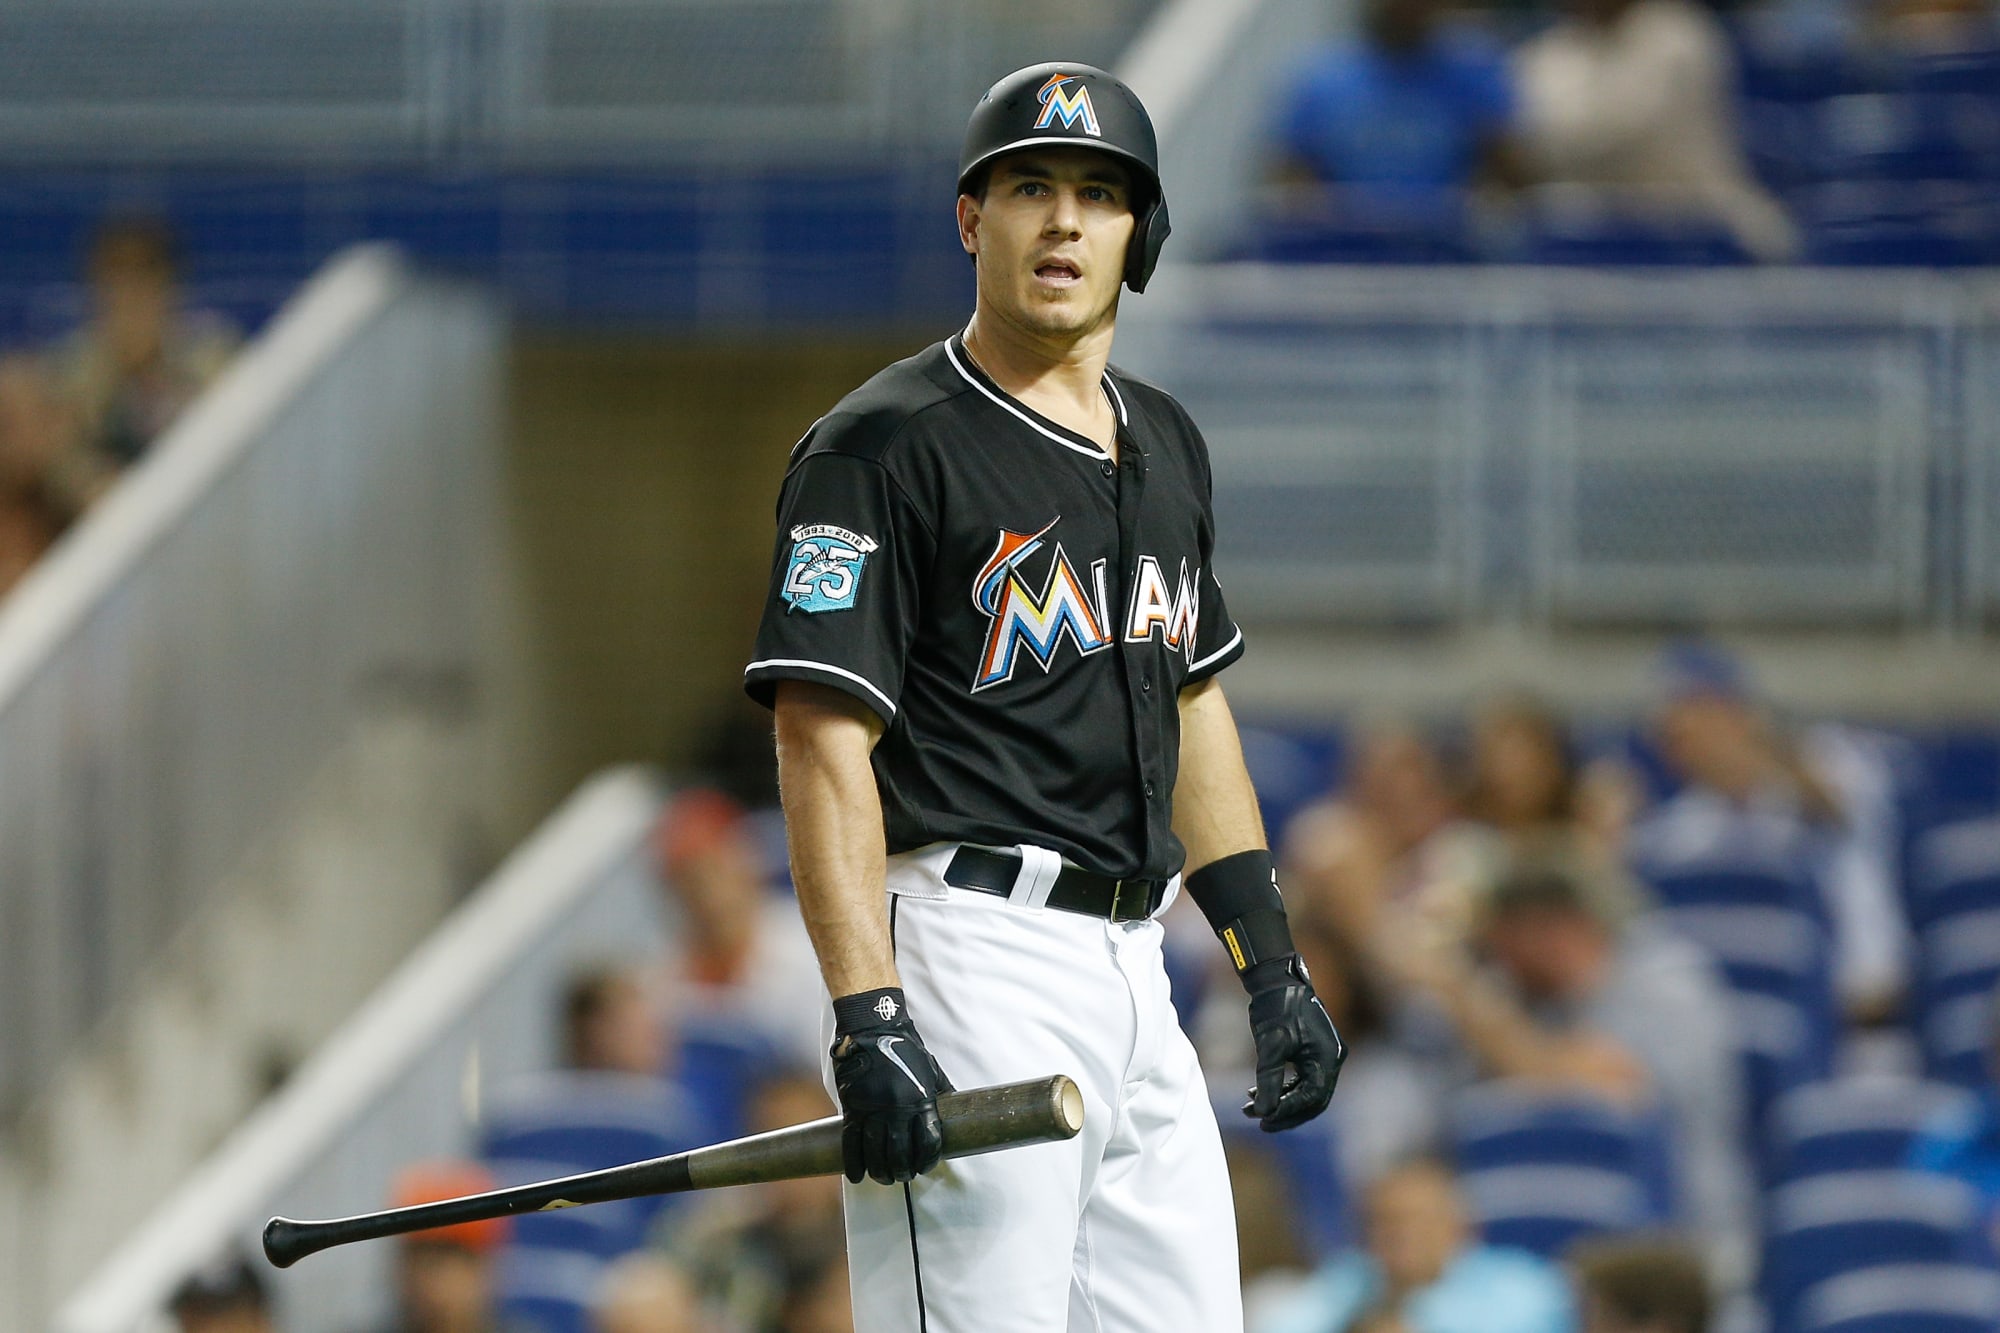 Former Marlin Christian Yelich speaks highly of catcher J.T. Realmuto, who  could be Mets target – New York Daily News